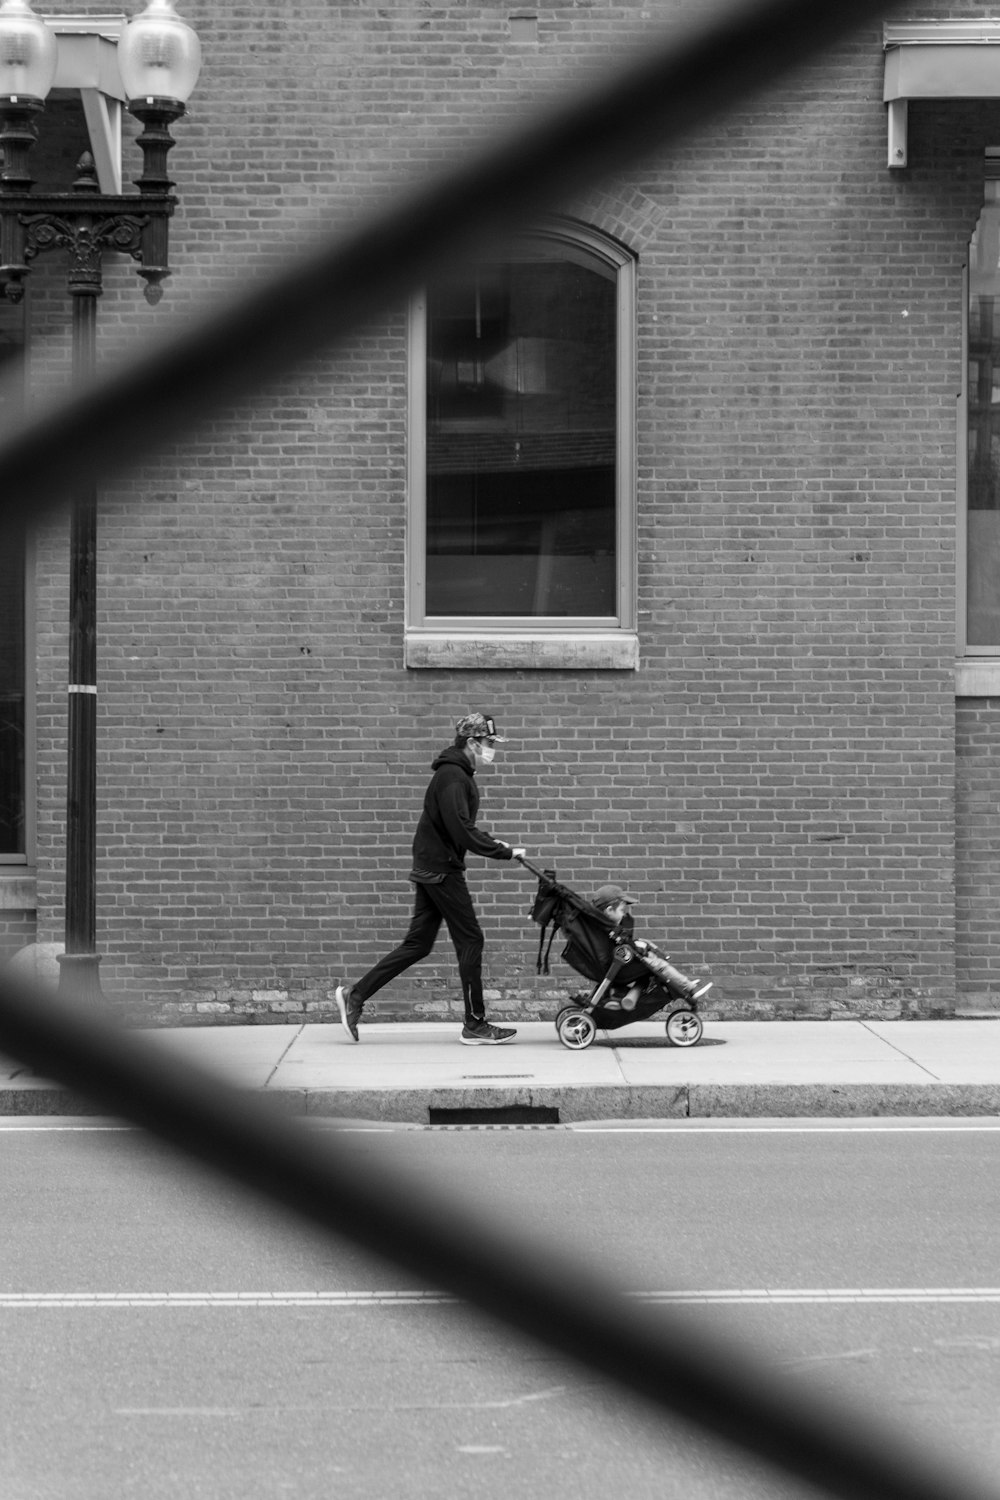 man in black jacket and pants riding bicycle in grayscale photography